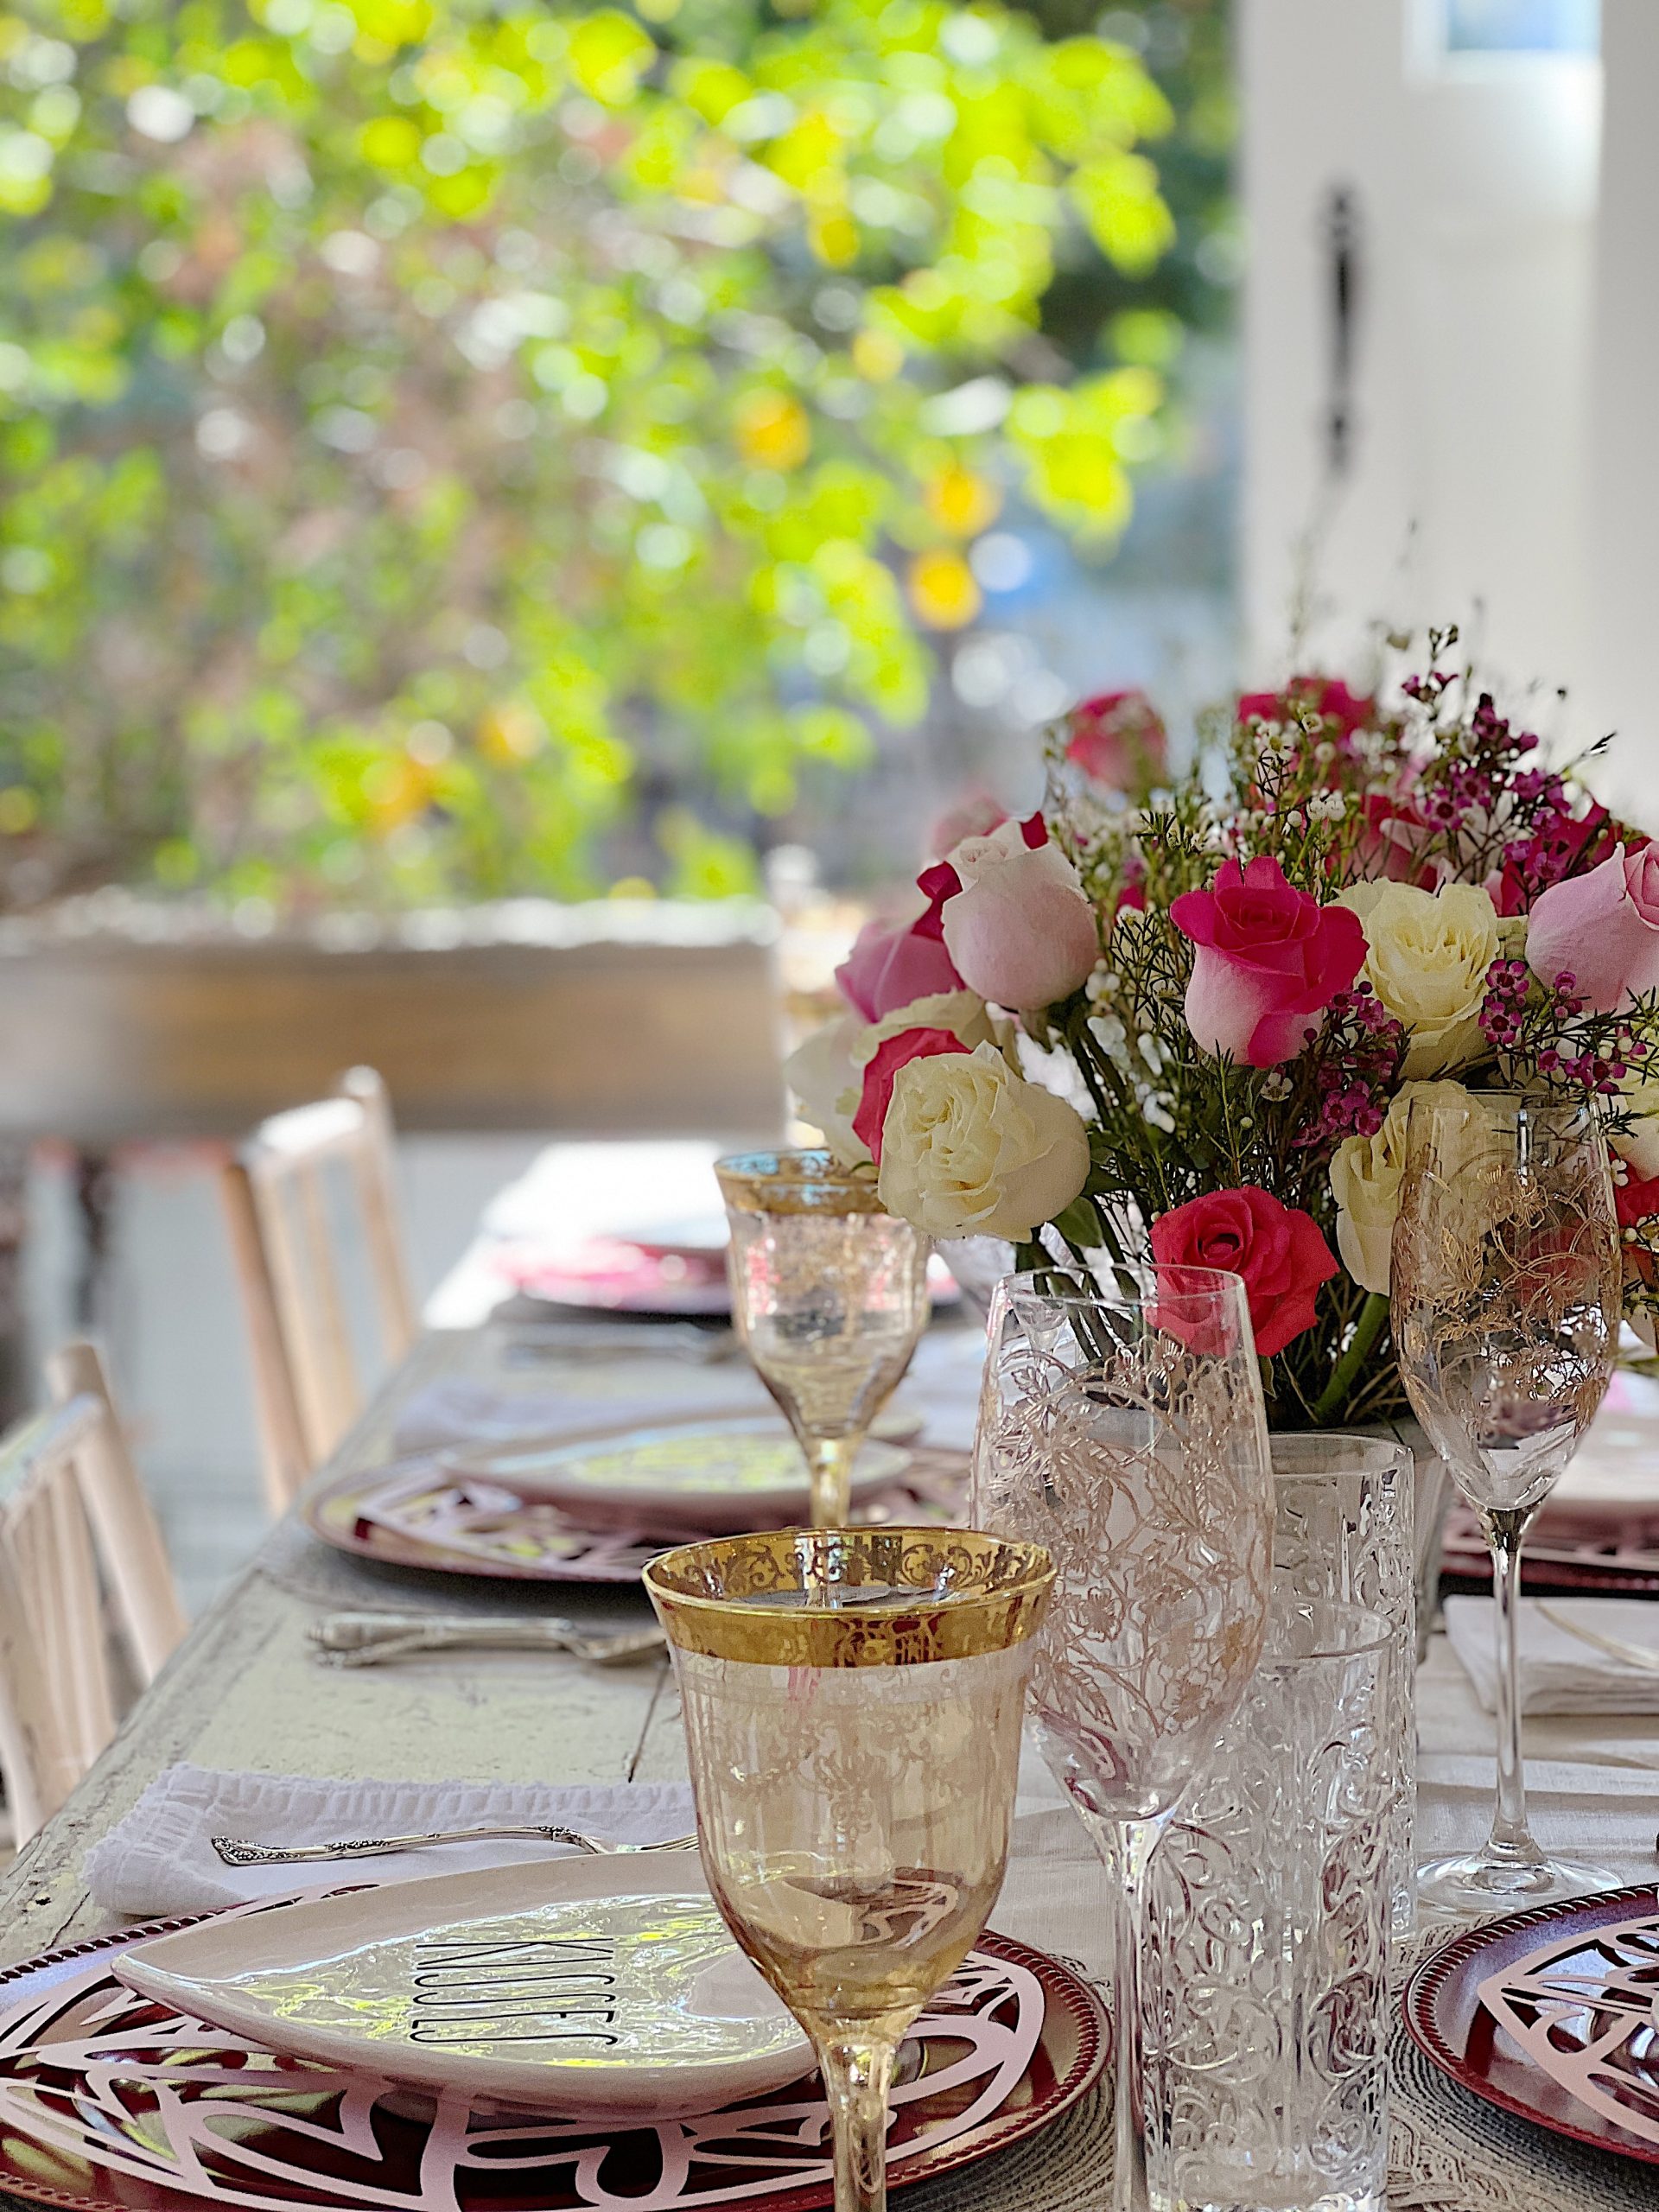 DIY Valentine's Table Decor Using Vintage Finds from Goodwill and Garage  Sales.